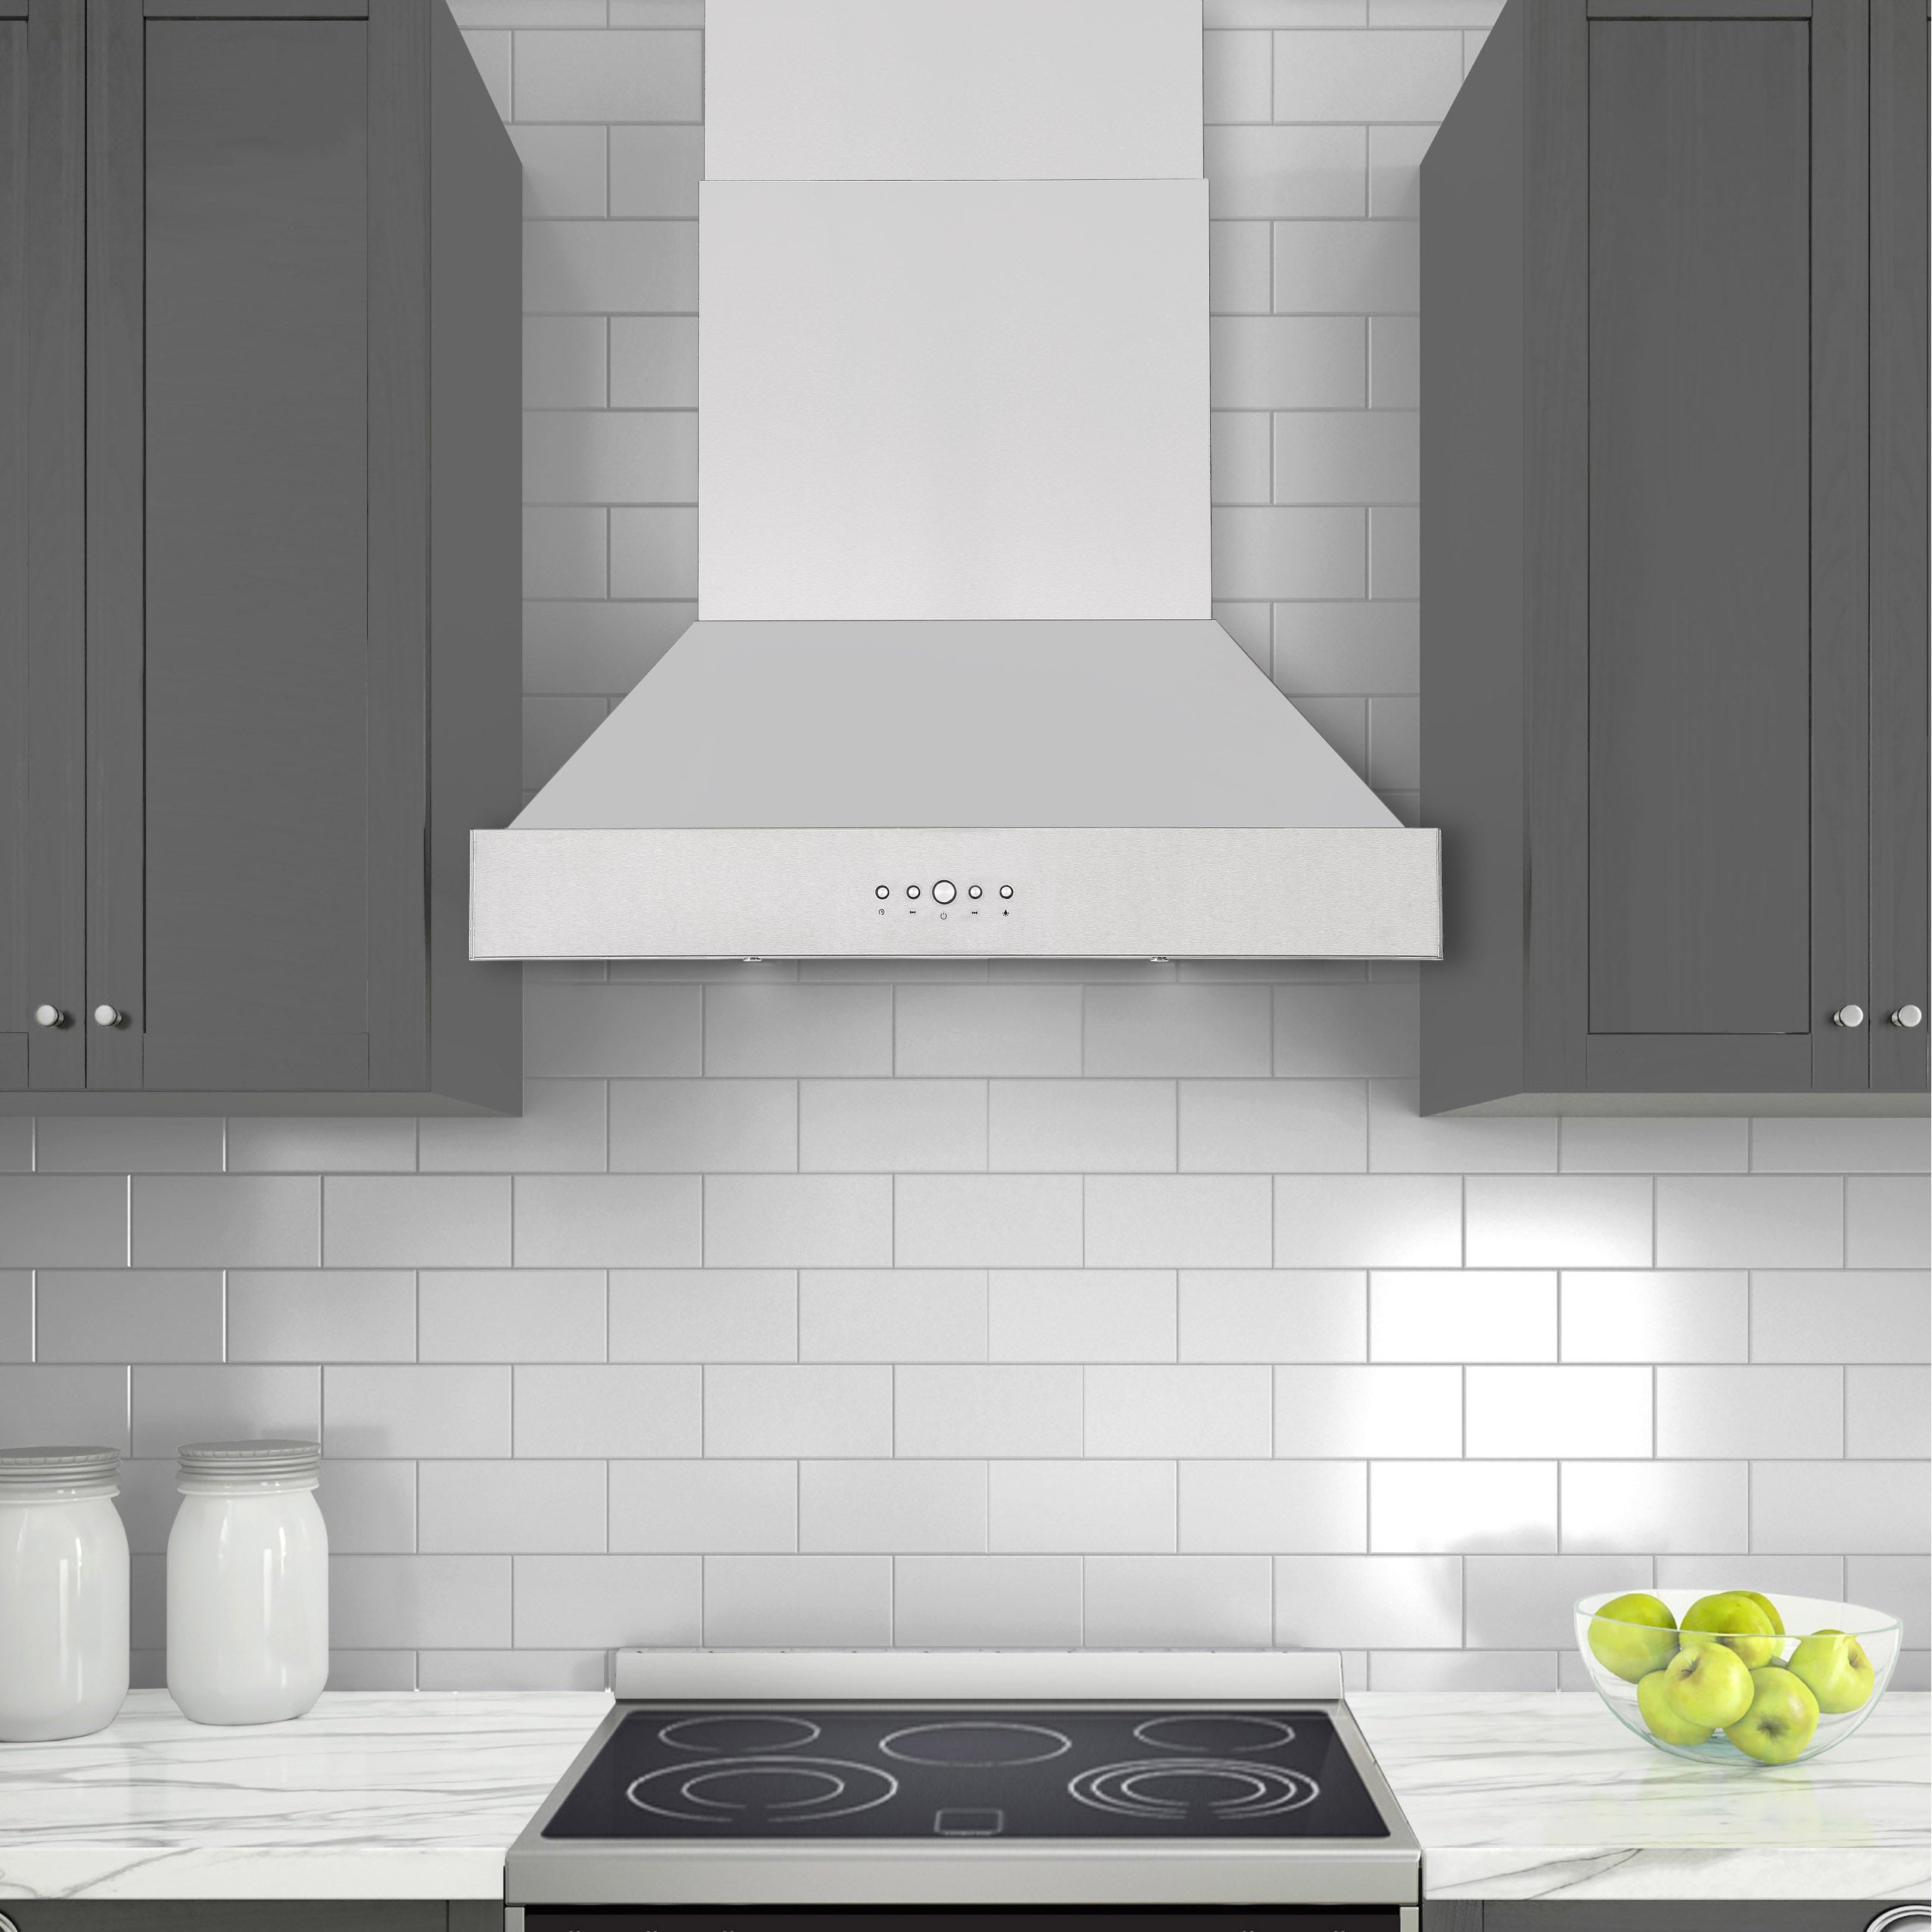 30 in. Pro Series Wall-Mounted Pyramid Range Hood in Stainless Steel